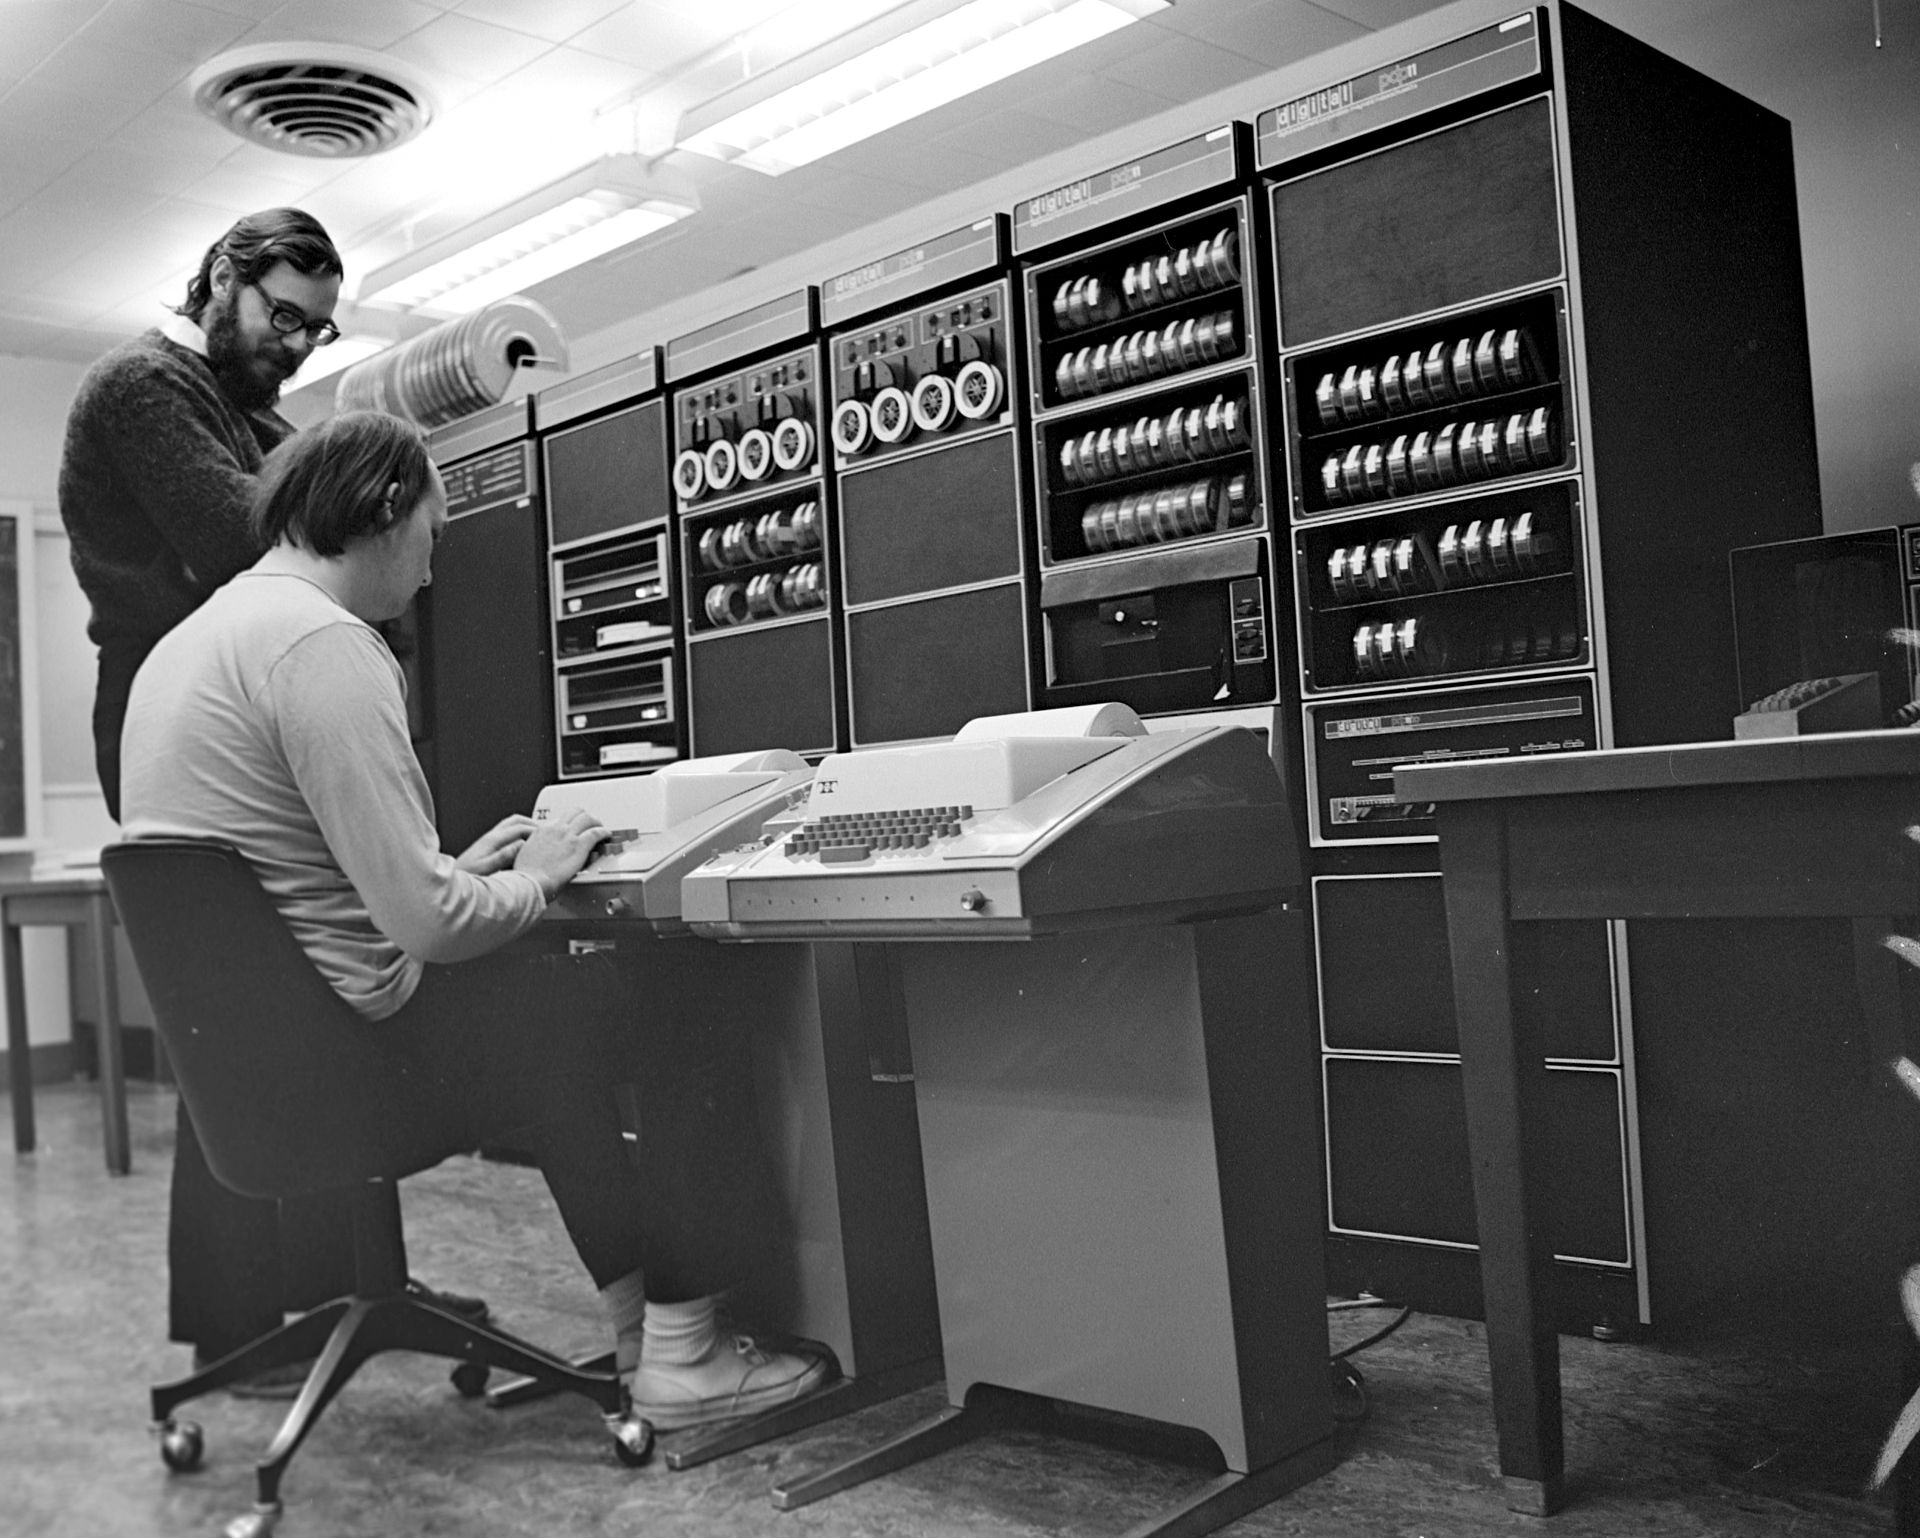 Ken Thompson and Dennis Ritchie, creators of UNIX. CC BY-SA 2.0 from http://en.wikipedia.org/wiki/Unix#/media/File:Ken_Thompson_(sitting)_and_Dennis_Ritchie_at_PDP-11_(2876612463).jpg